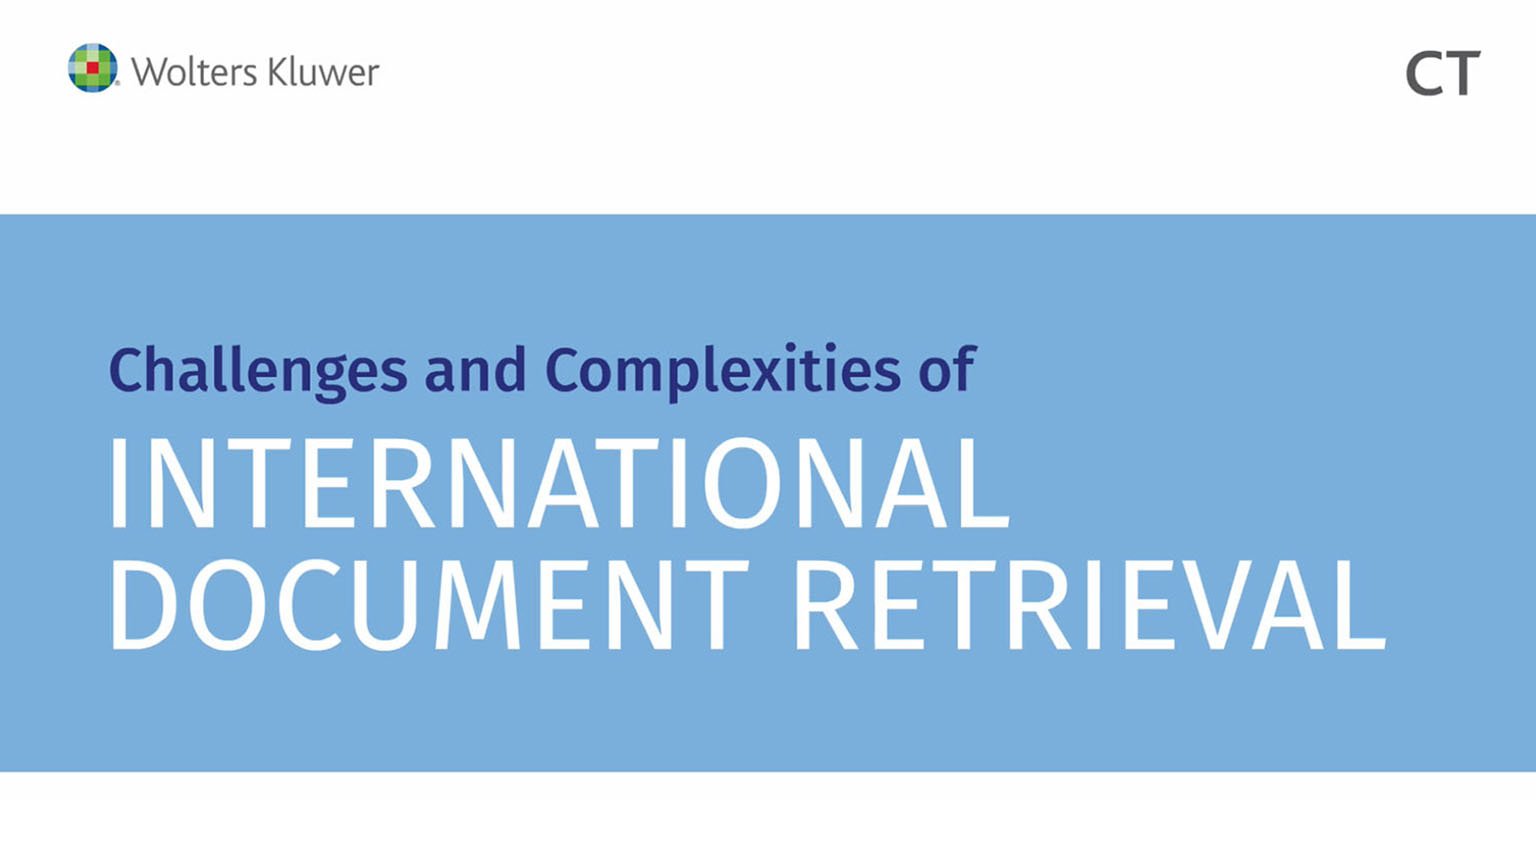 Challenges and Complexities of International Document Retrieval